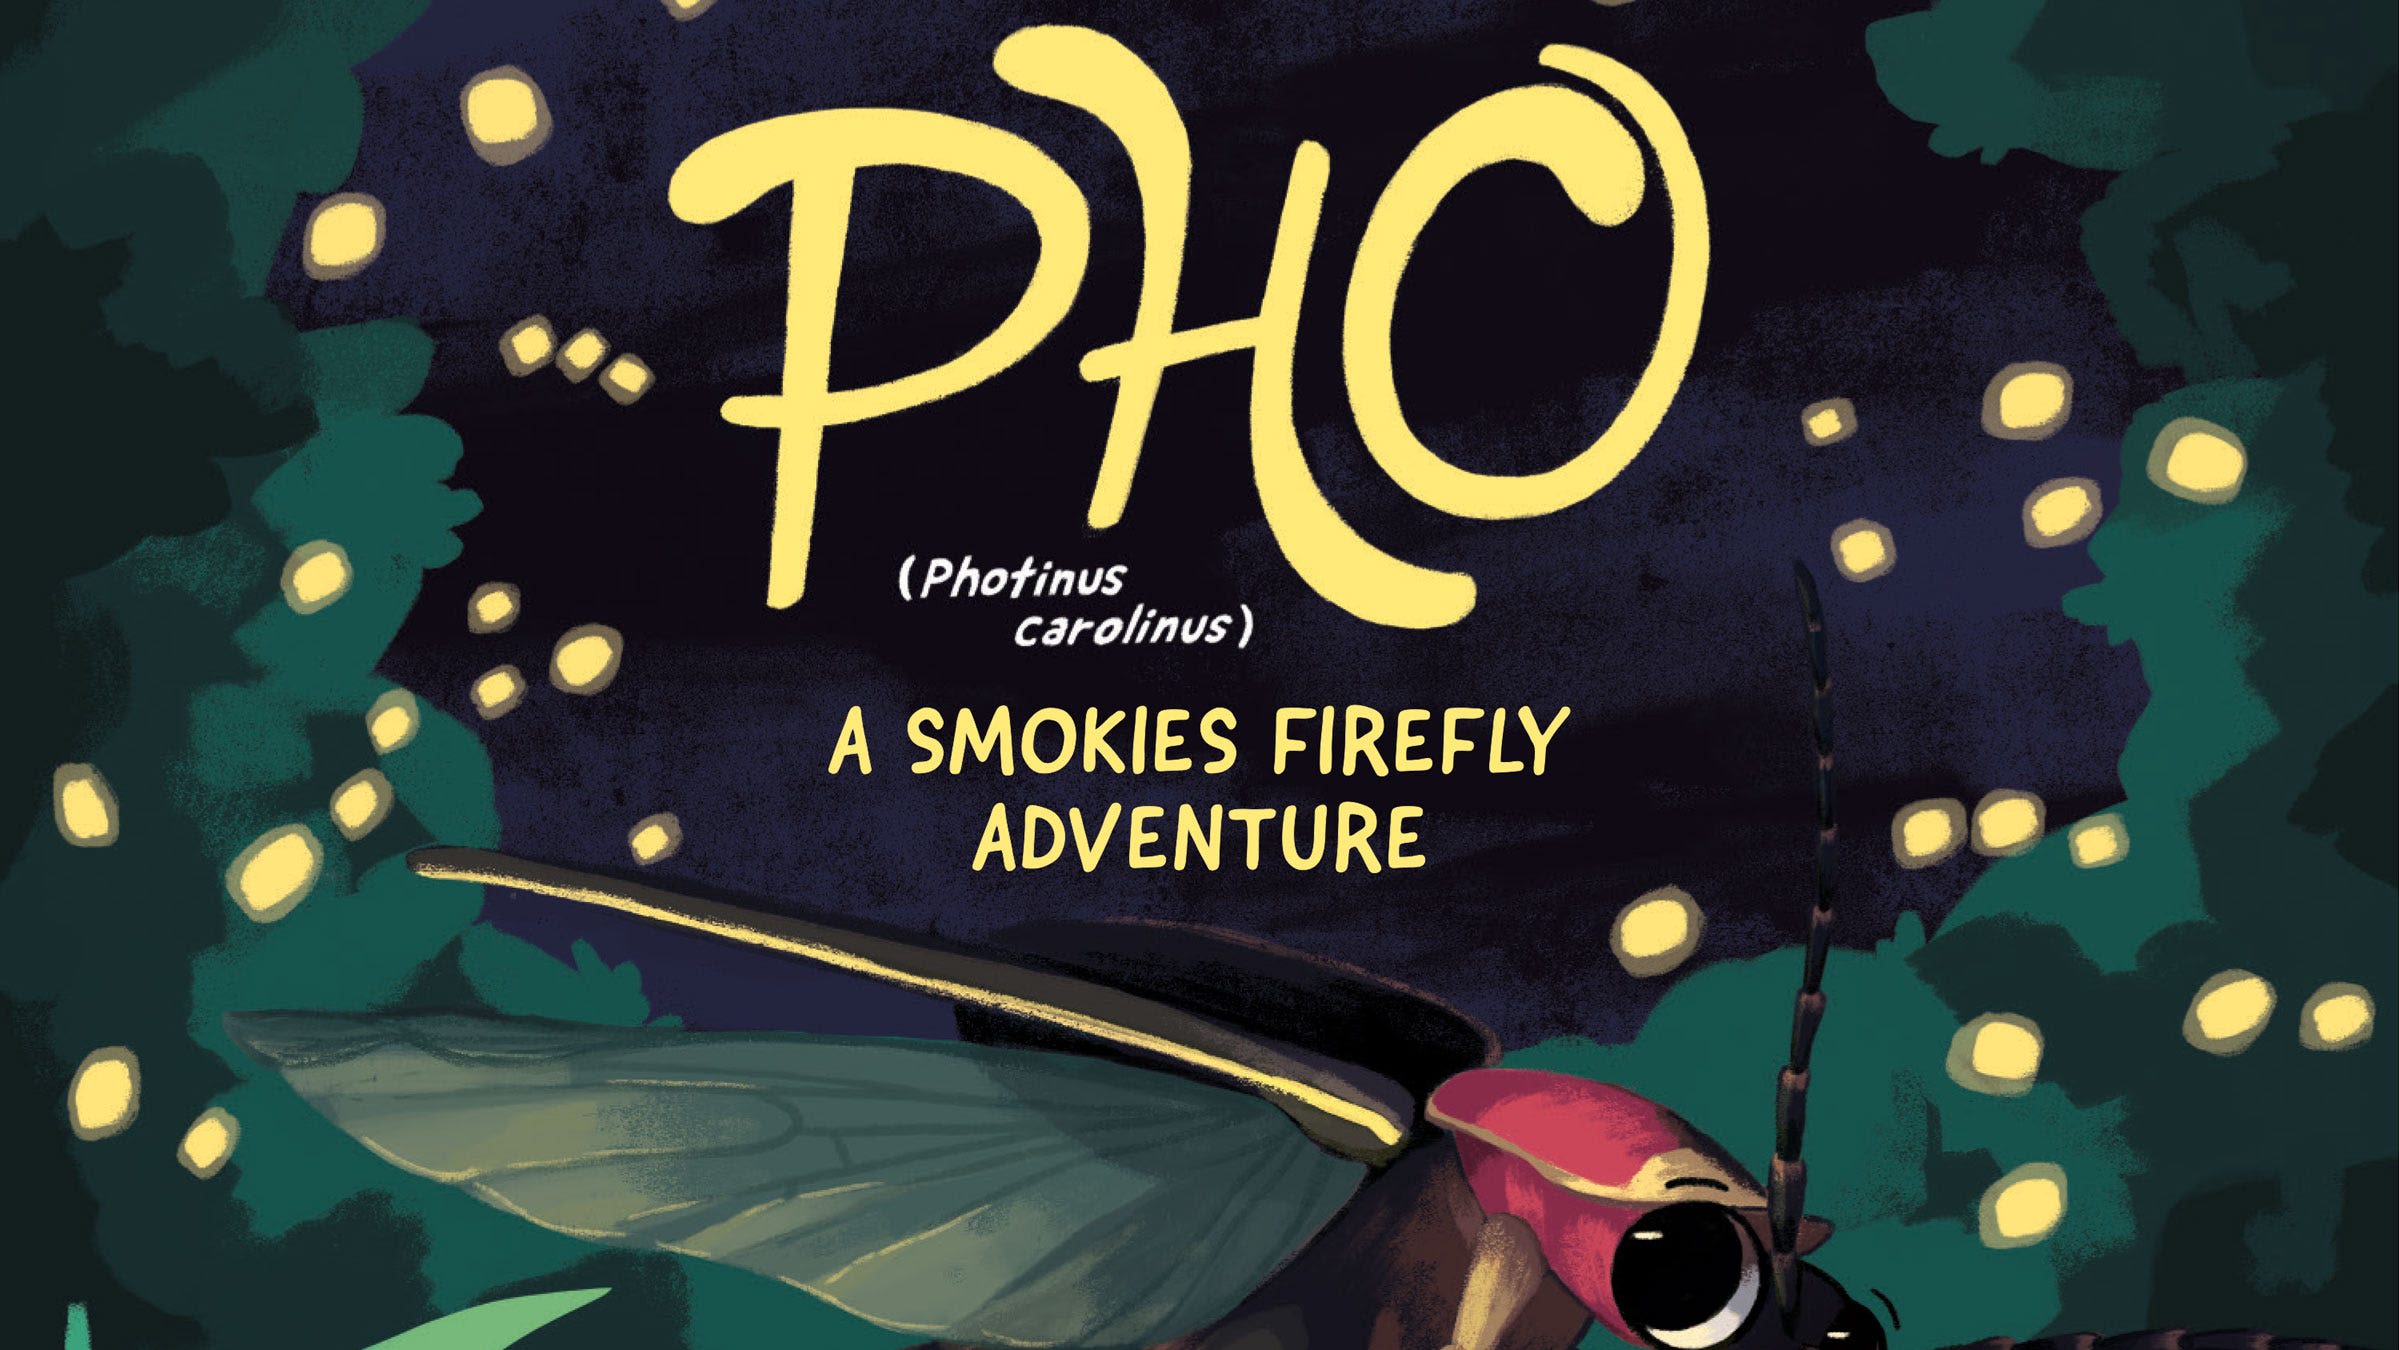 Word from the Smokies: New children’s book helps kids explore mysterious world of fireflies